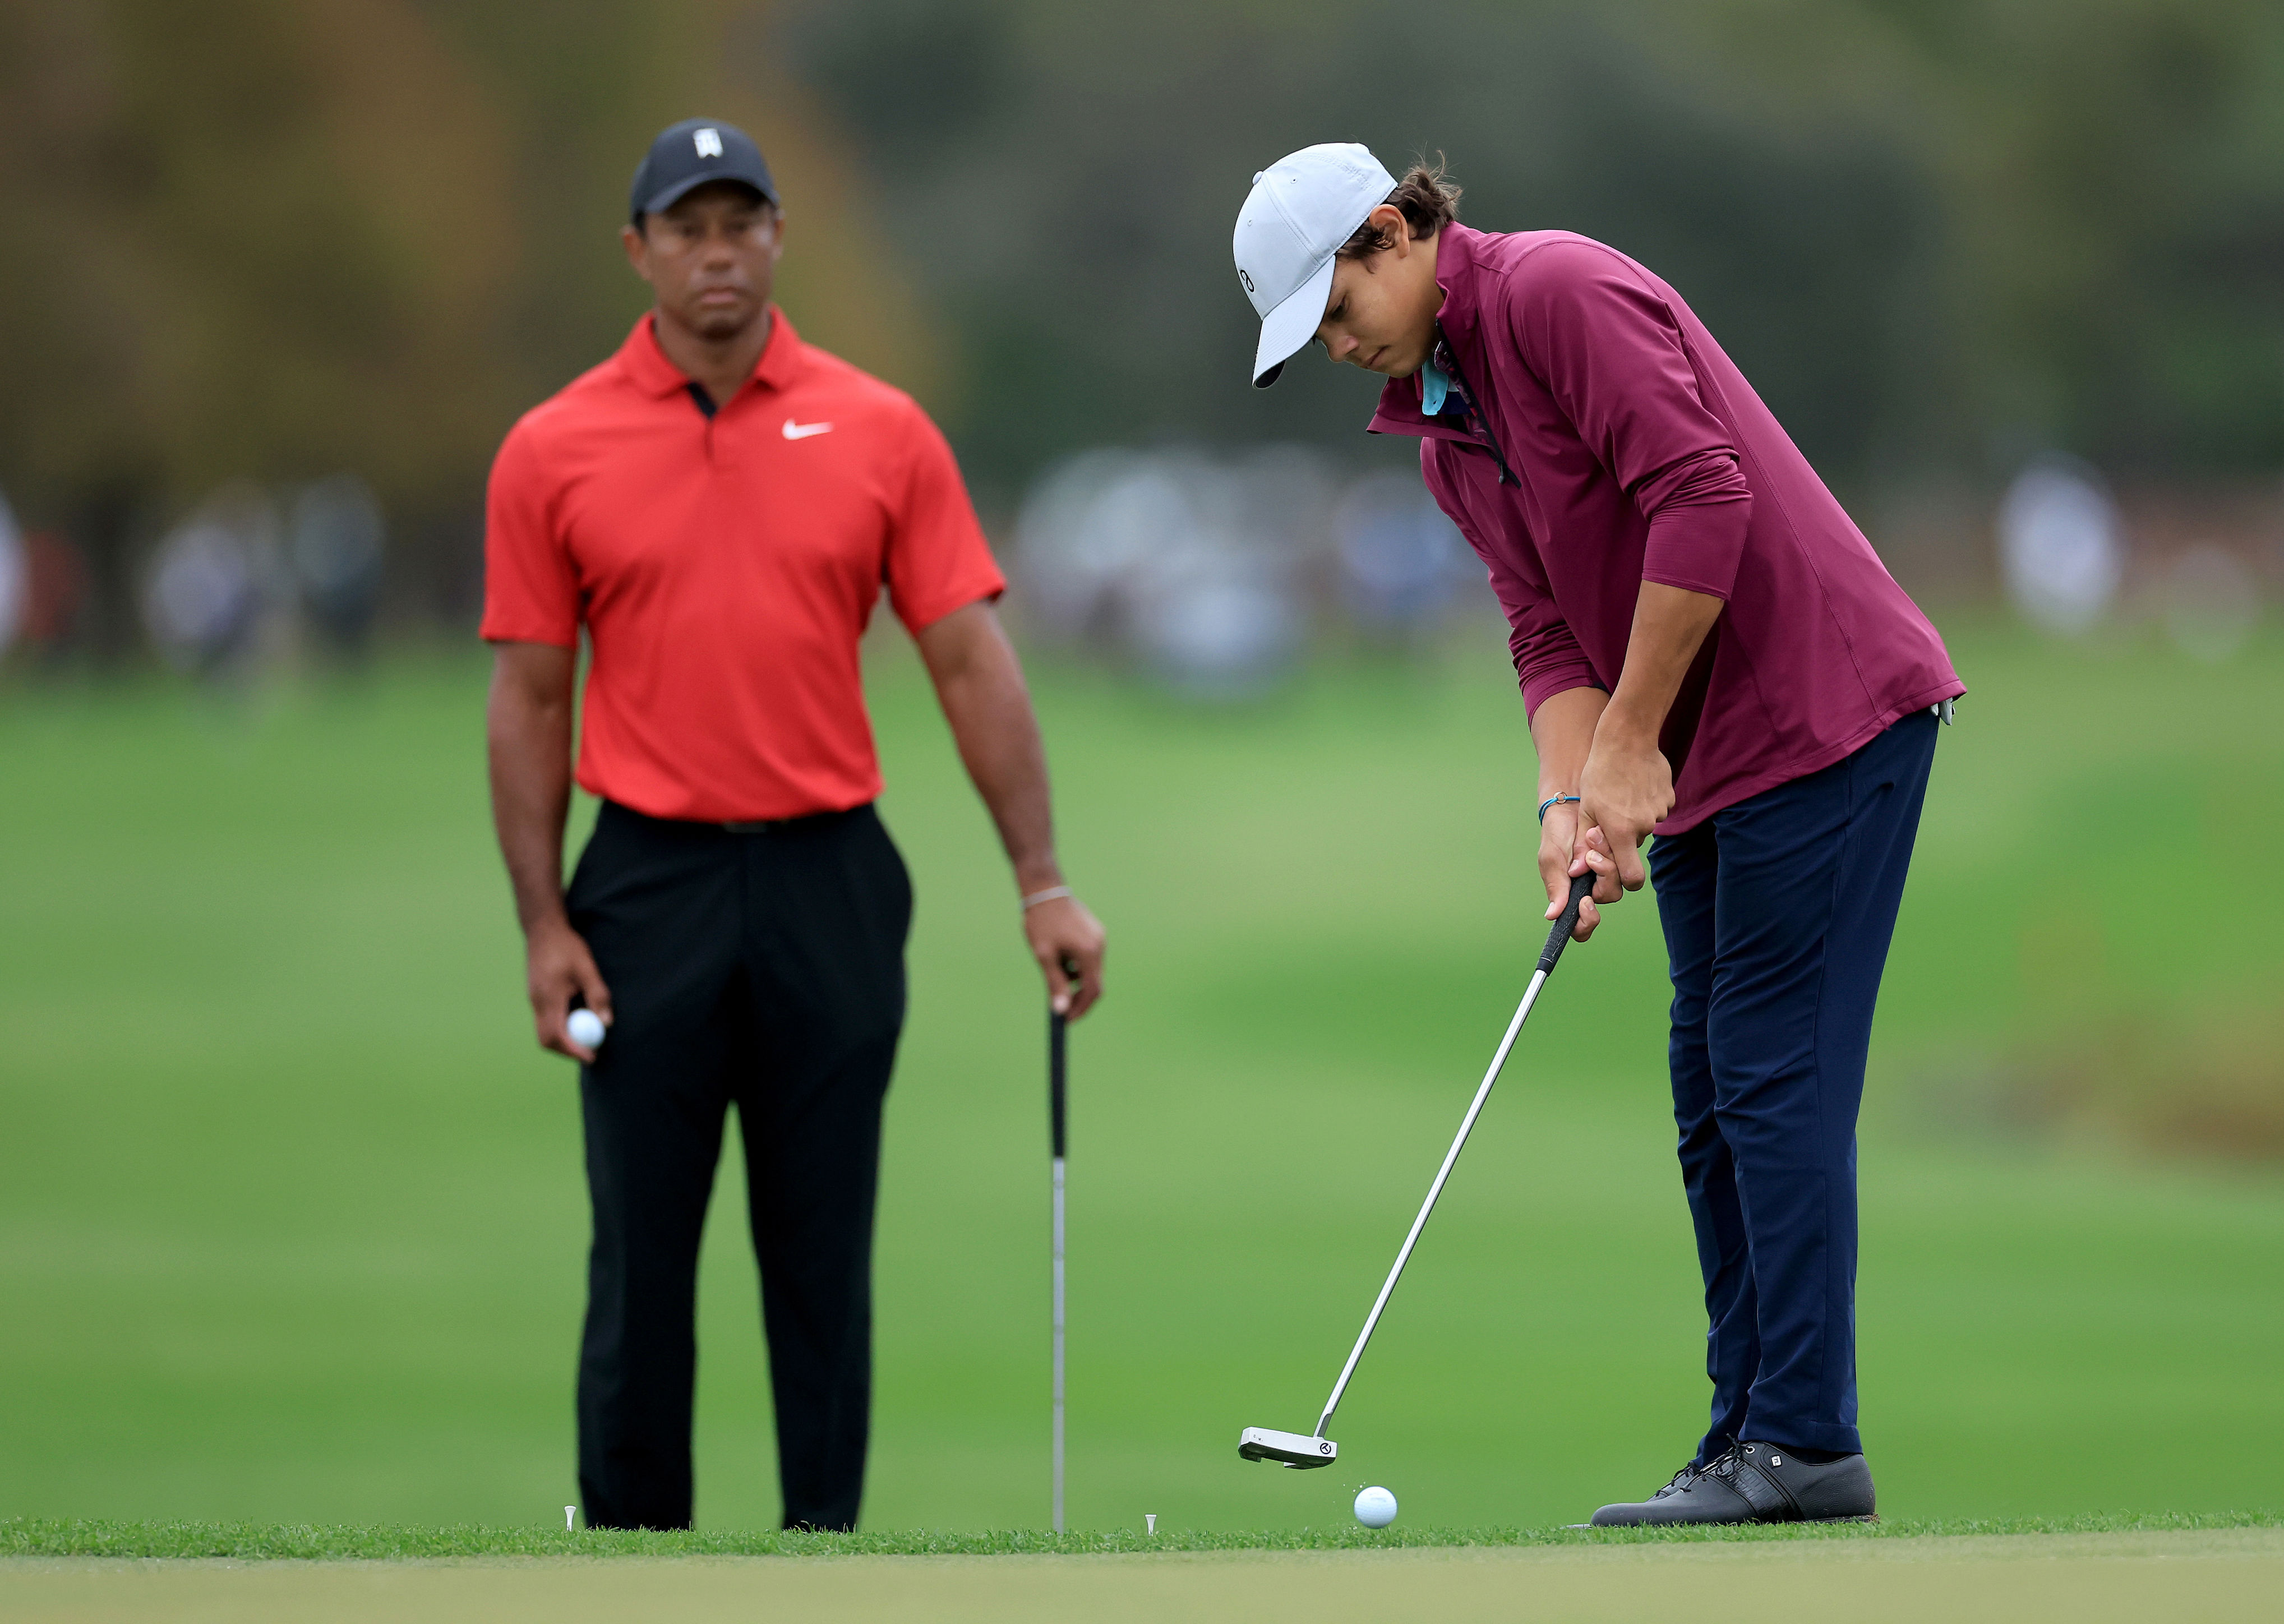 tiger's teenage son stumbles in us open attempt